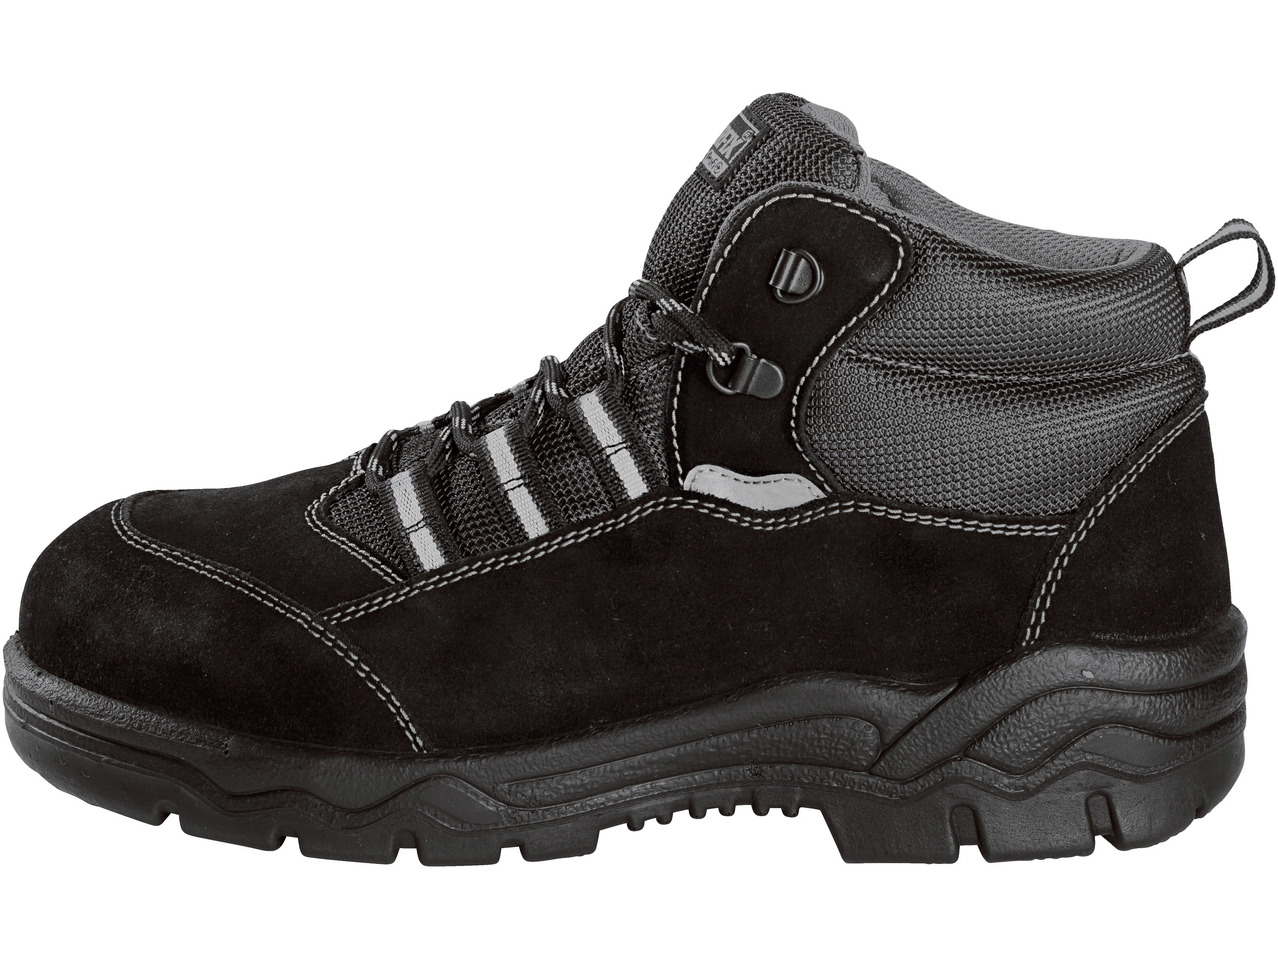 Men's Safety Boots